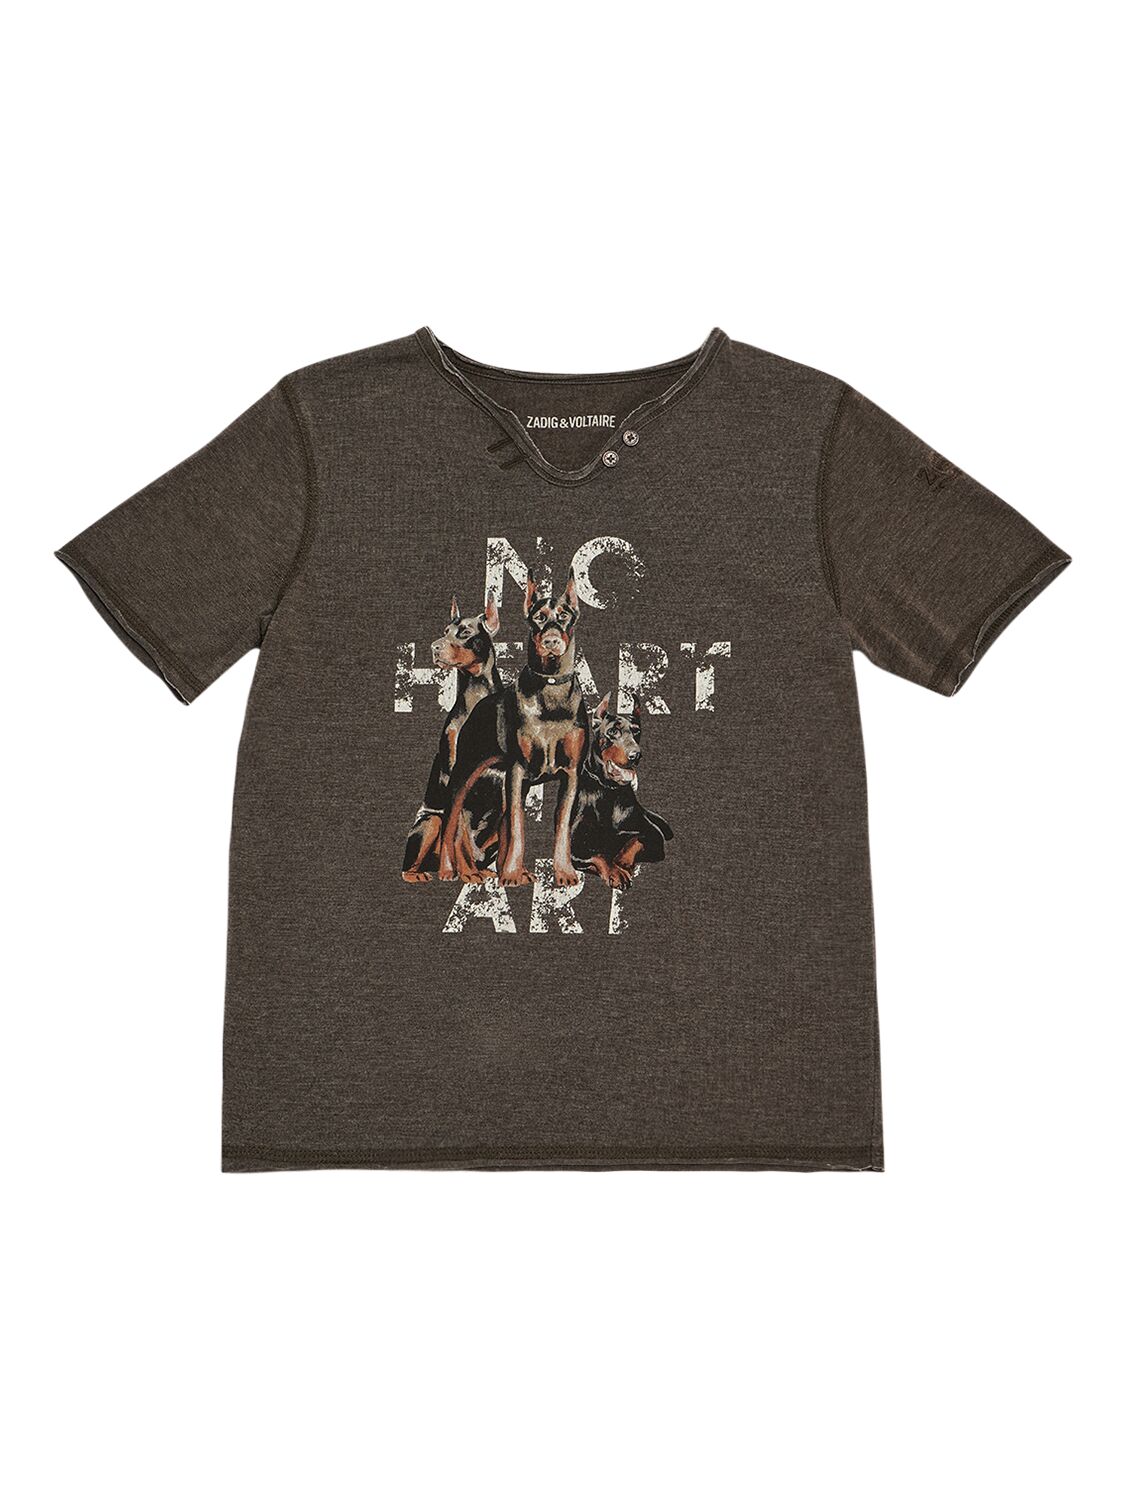 Zadig & Voltaire Kids' Printed Cotton Blend T-shirt In Khaki